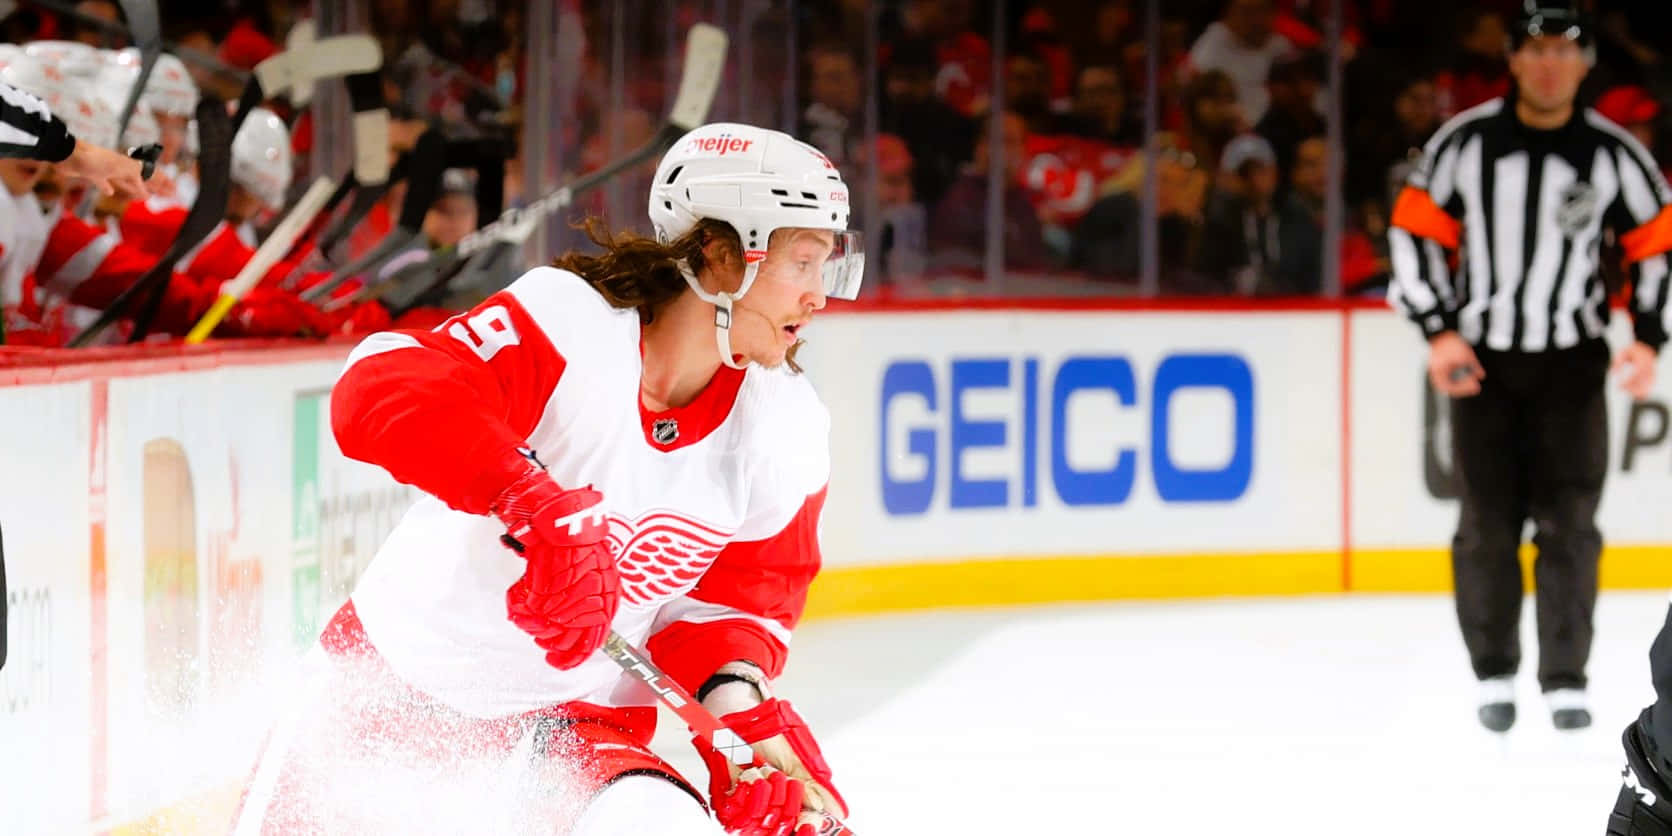 Tyler Bertuzzi in action during a high-intensity game Wallpaper